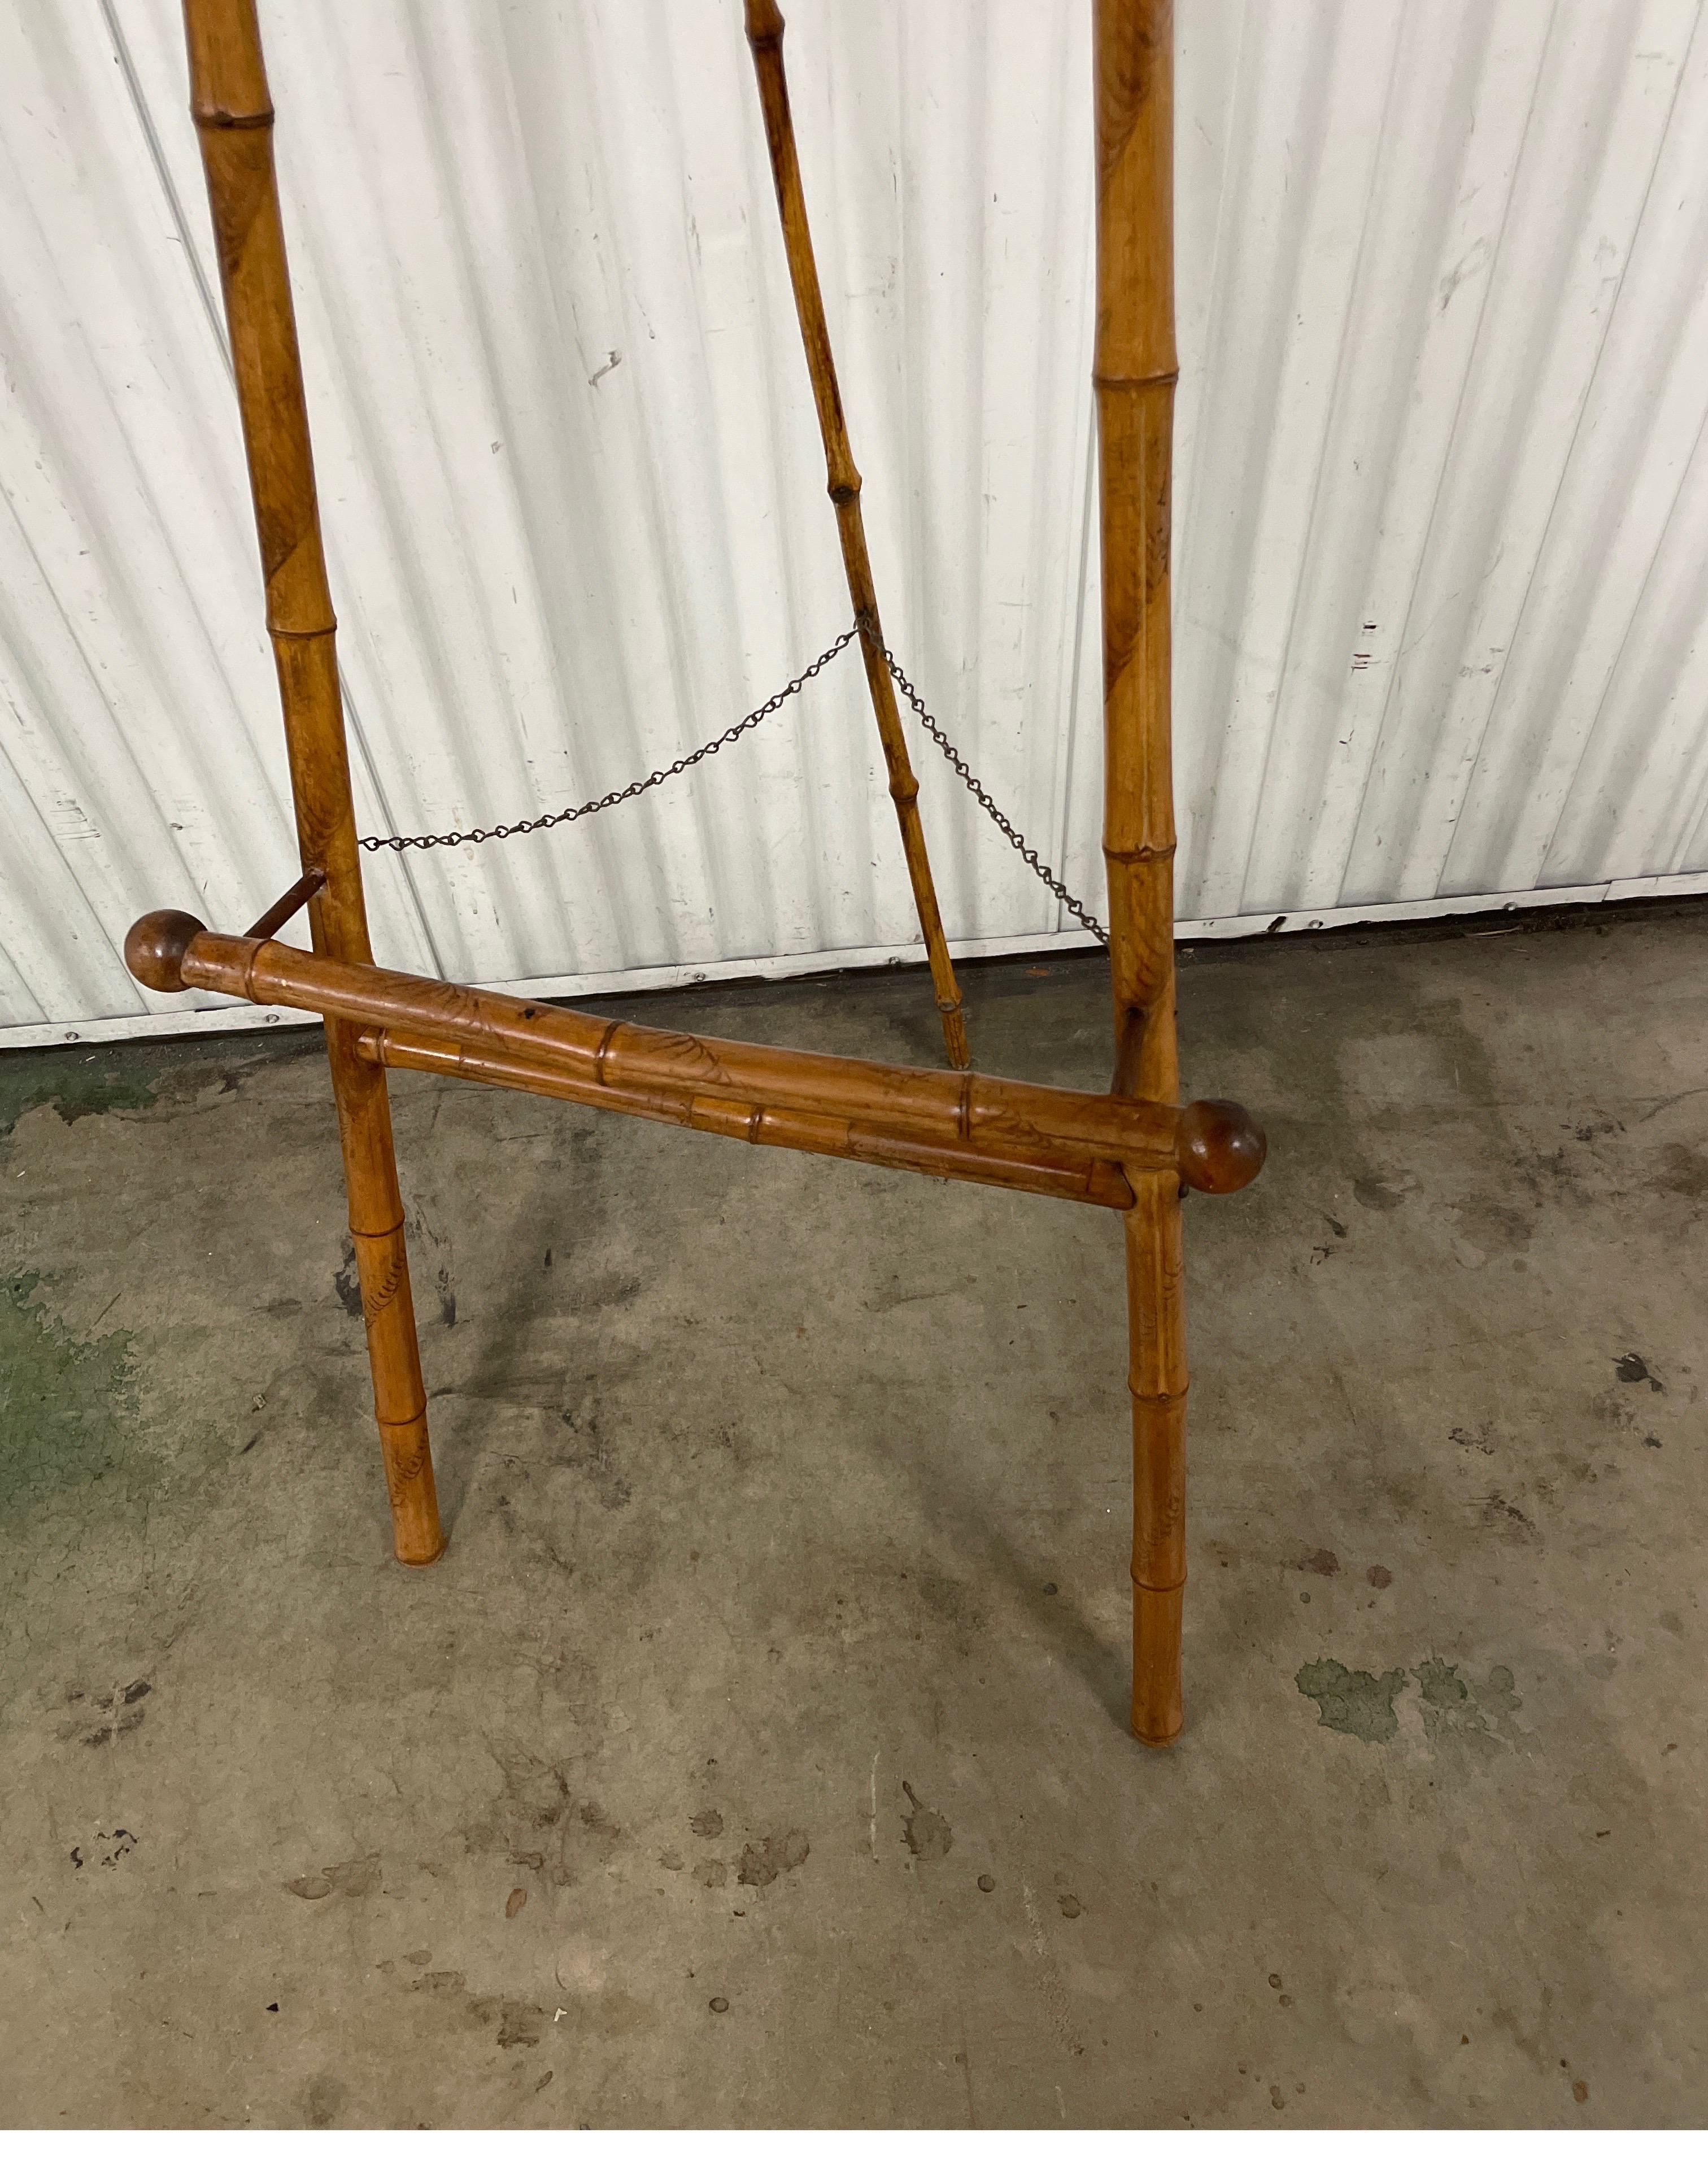 Antique bamboo display easel.  This natural bamboo easel will display one of your favorite pieces in great style.